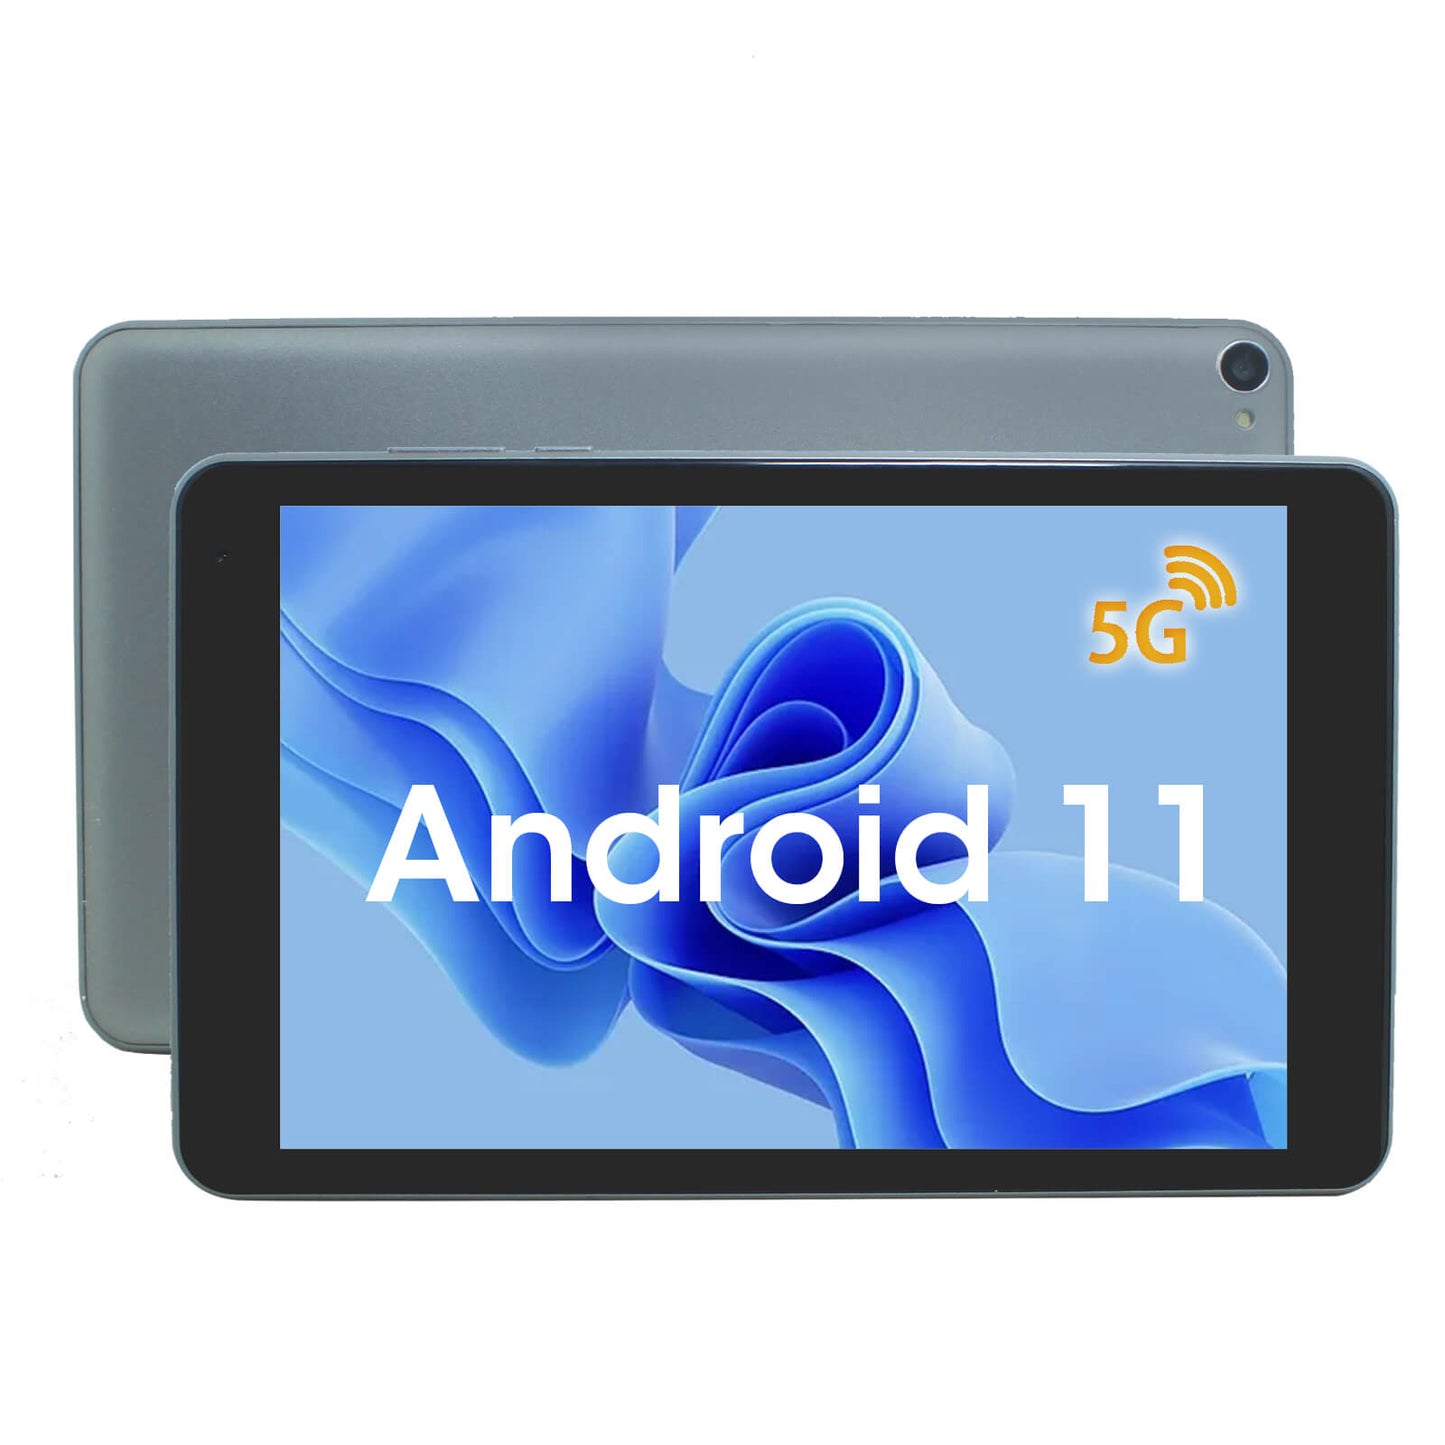 MQ 813 Android Tablet (Silver)